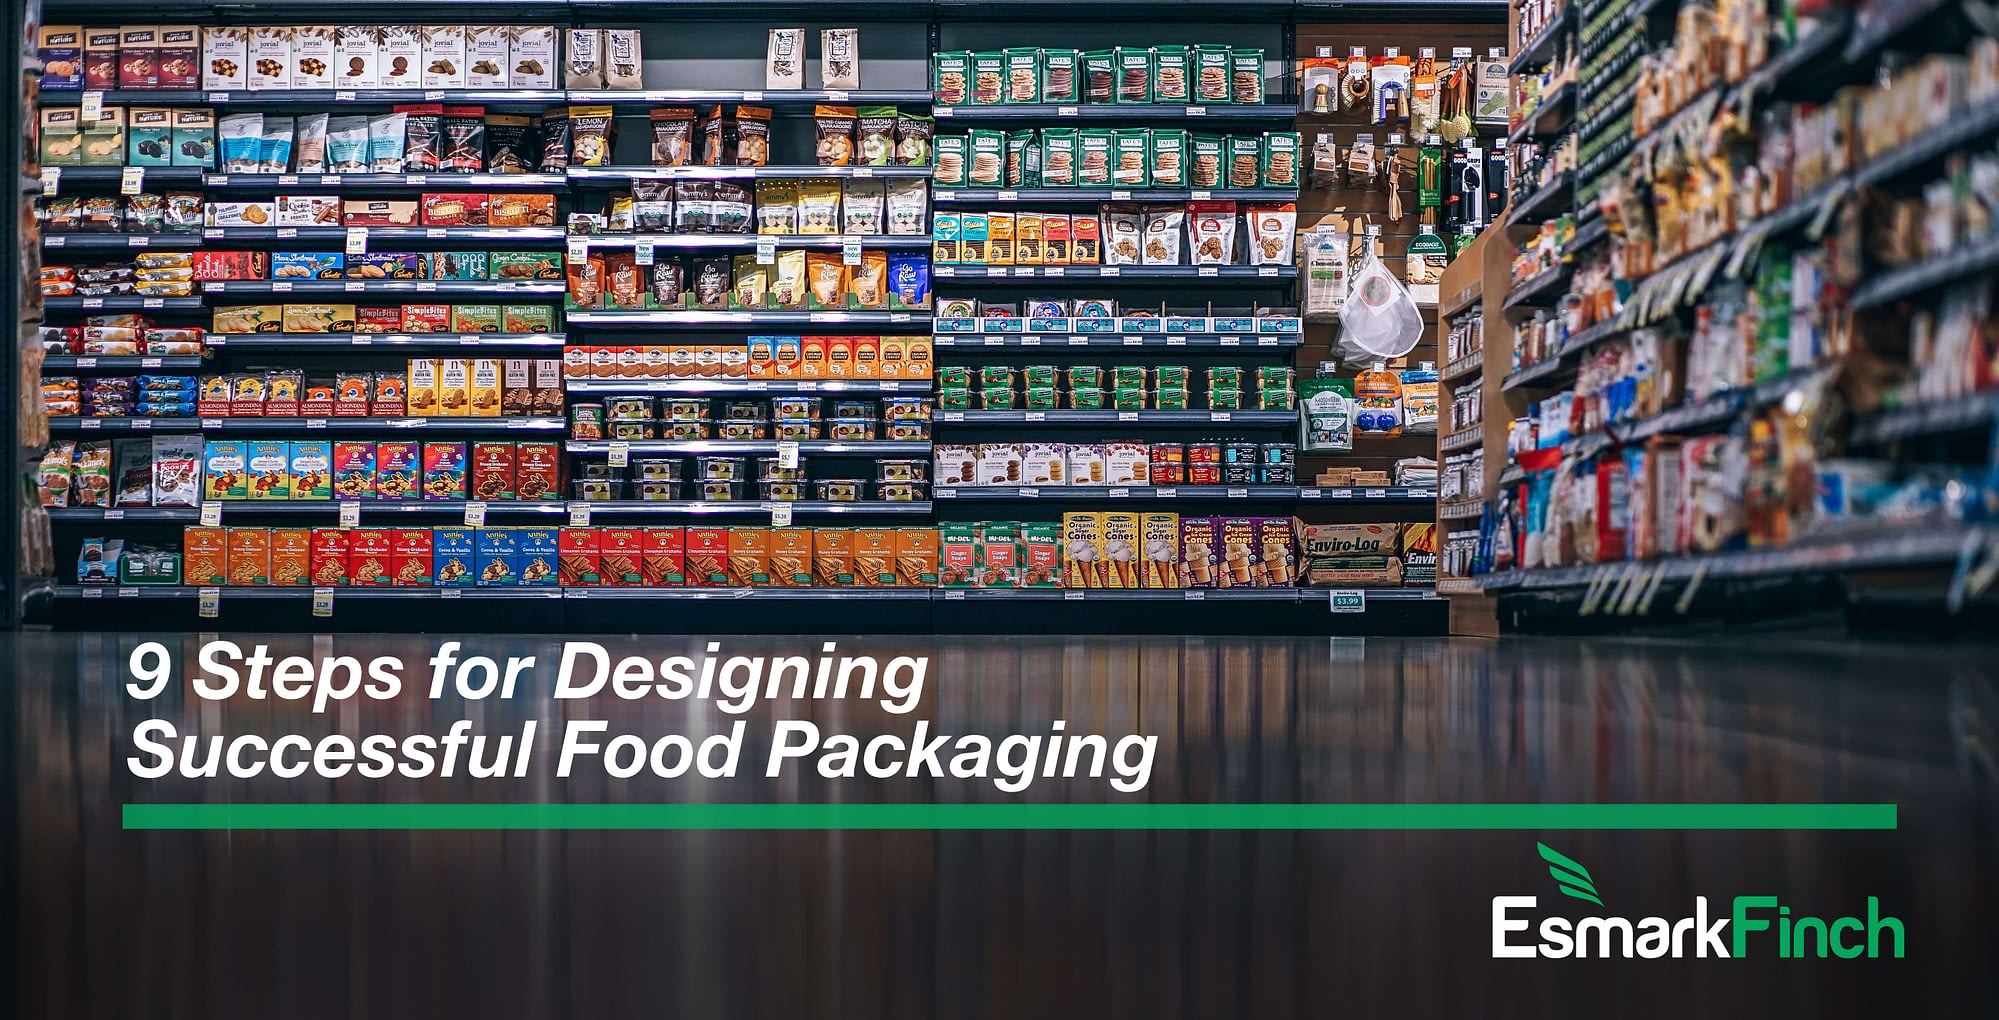 9 designs for designing successful food packaging with Esmark Finch